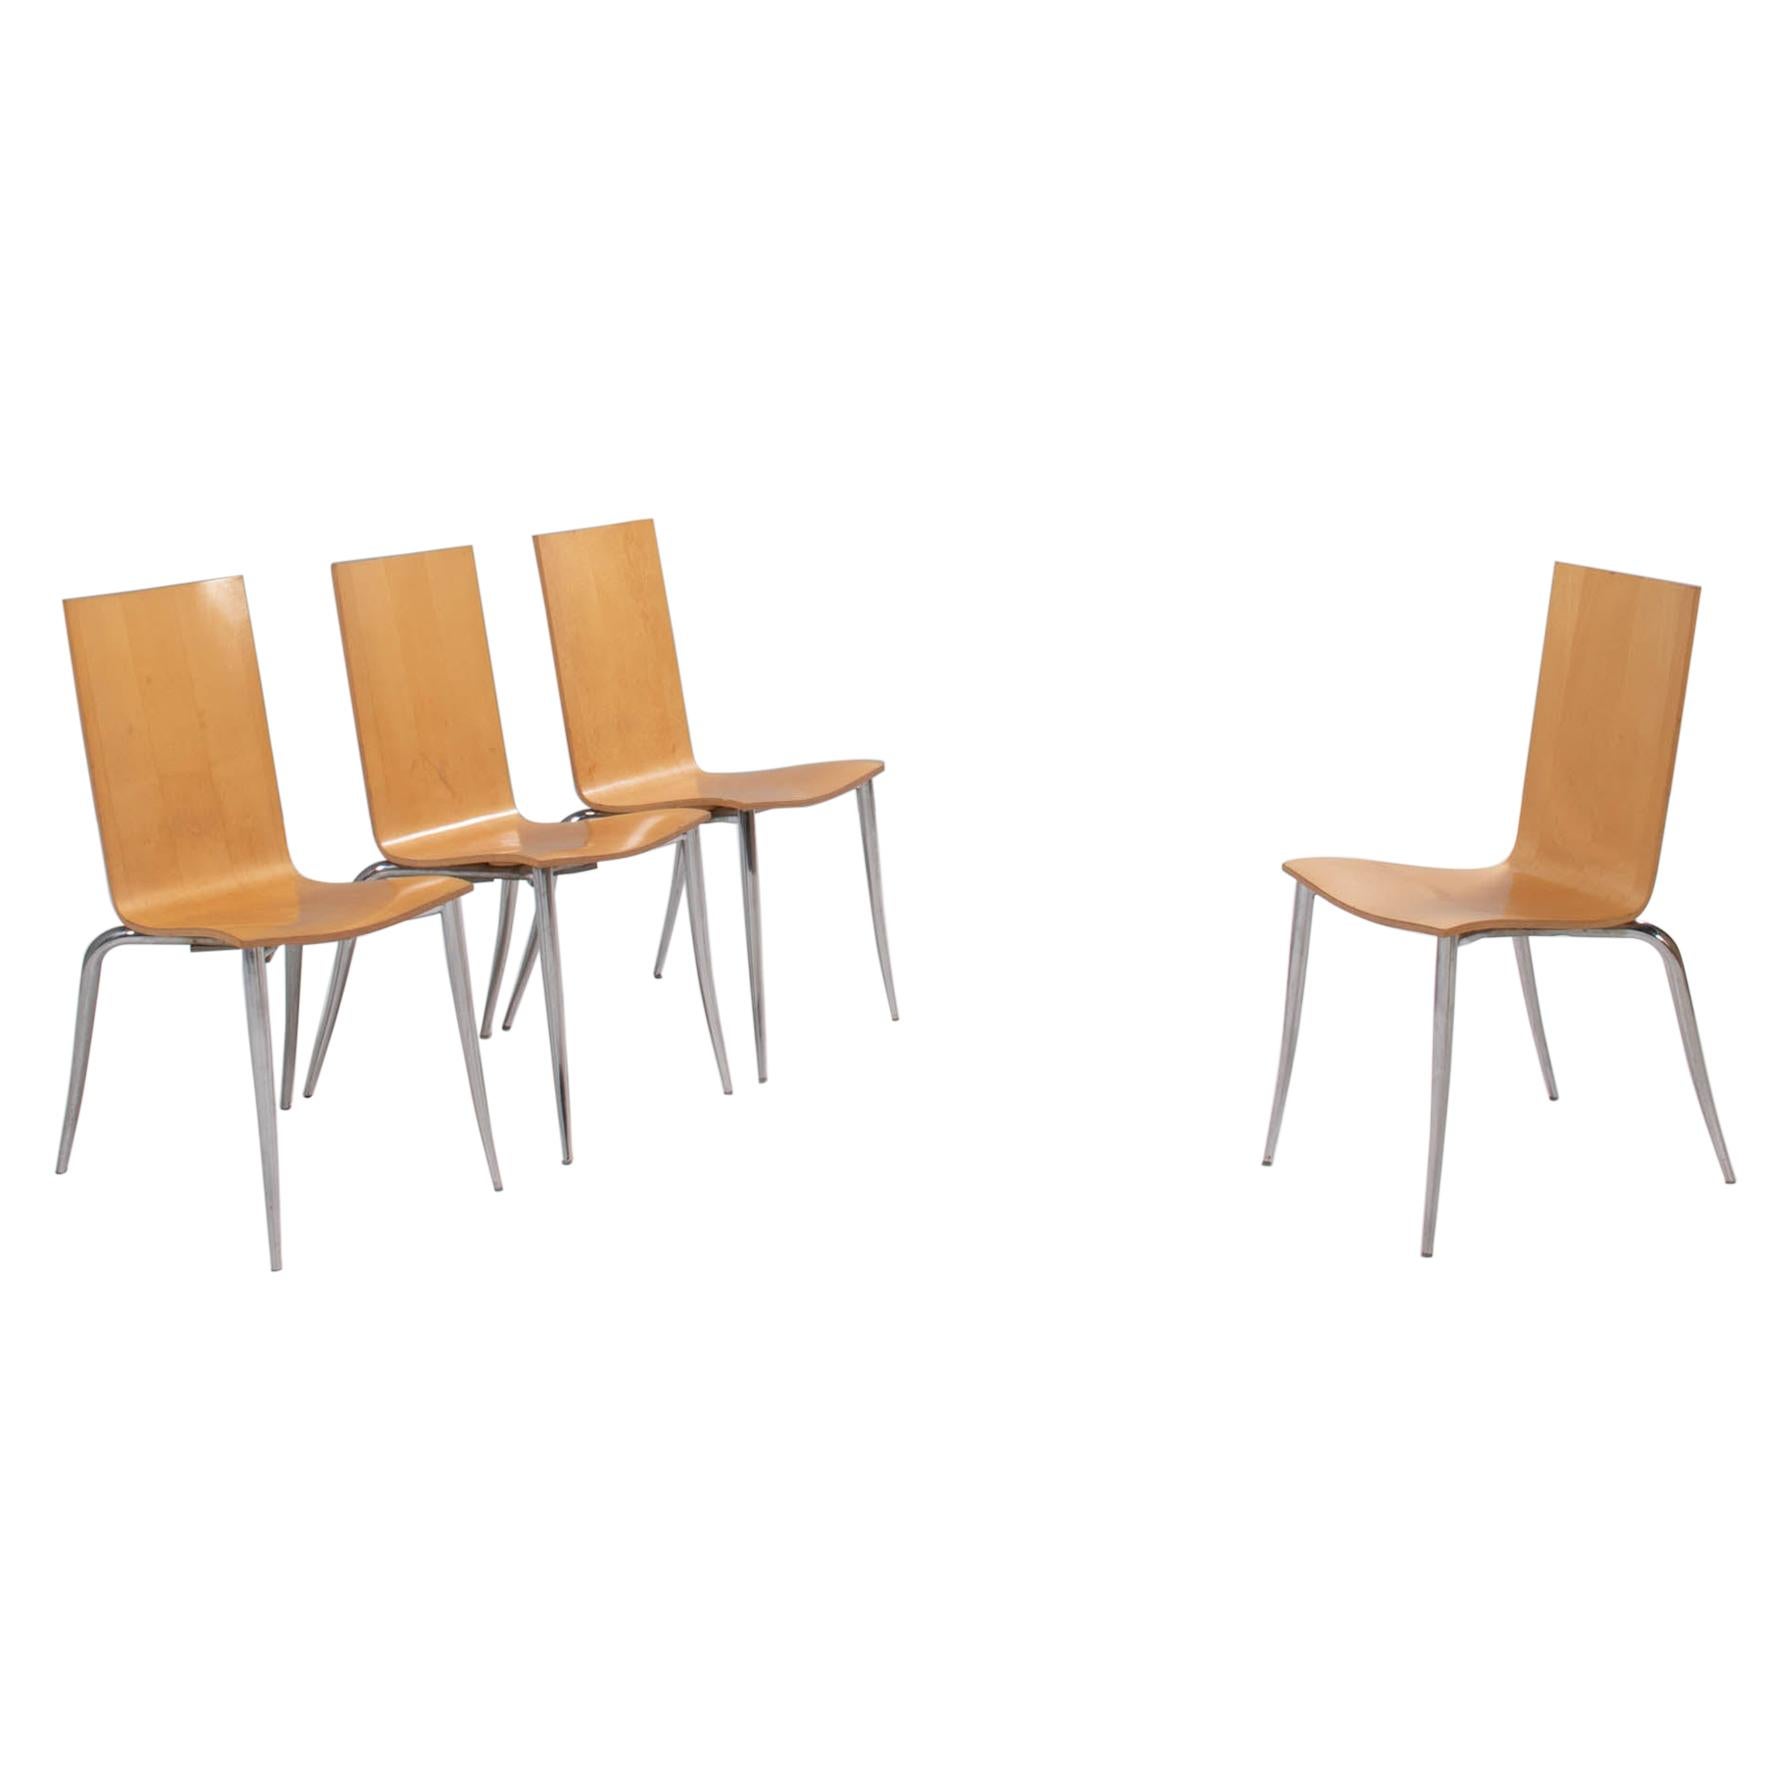 Olly Tango Chairs - For Sale on 1stDibs